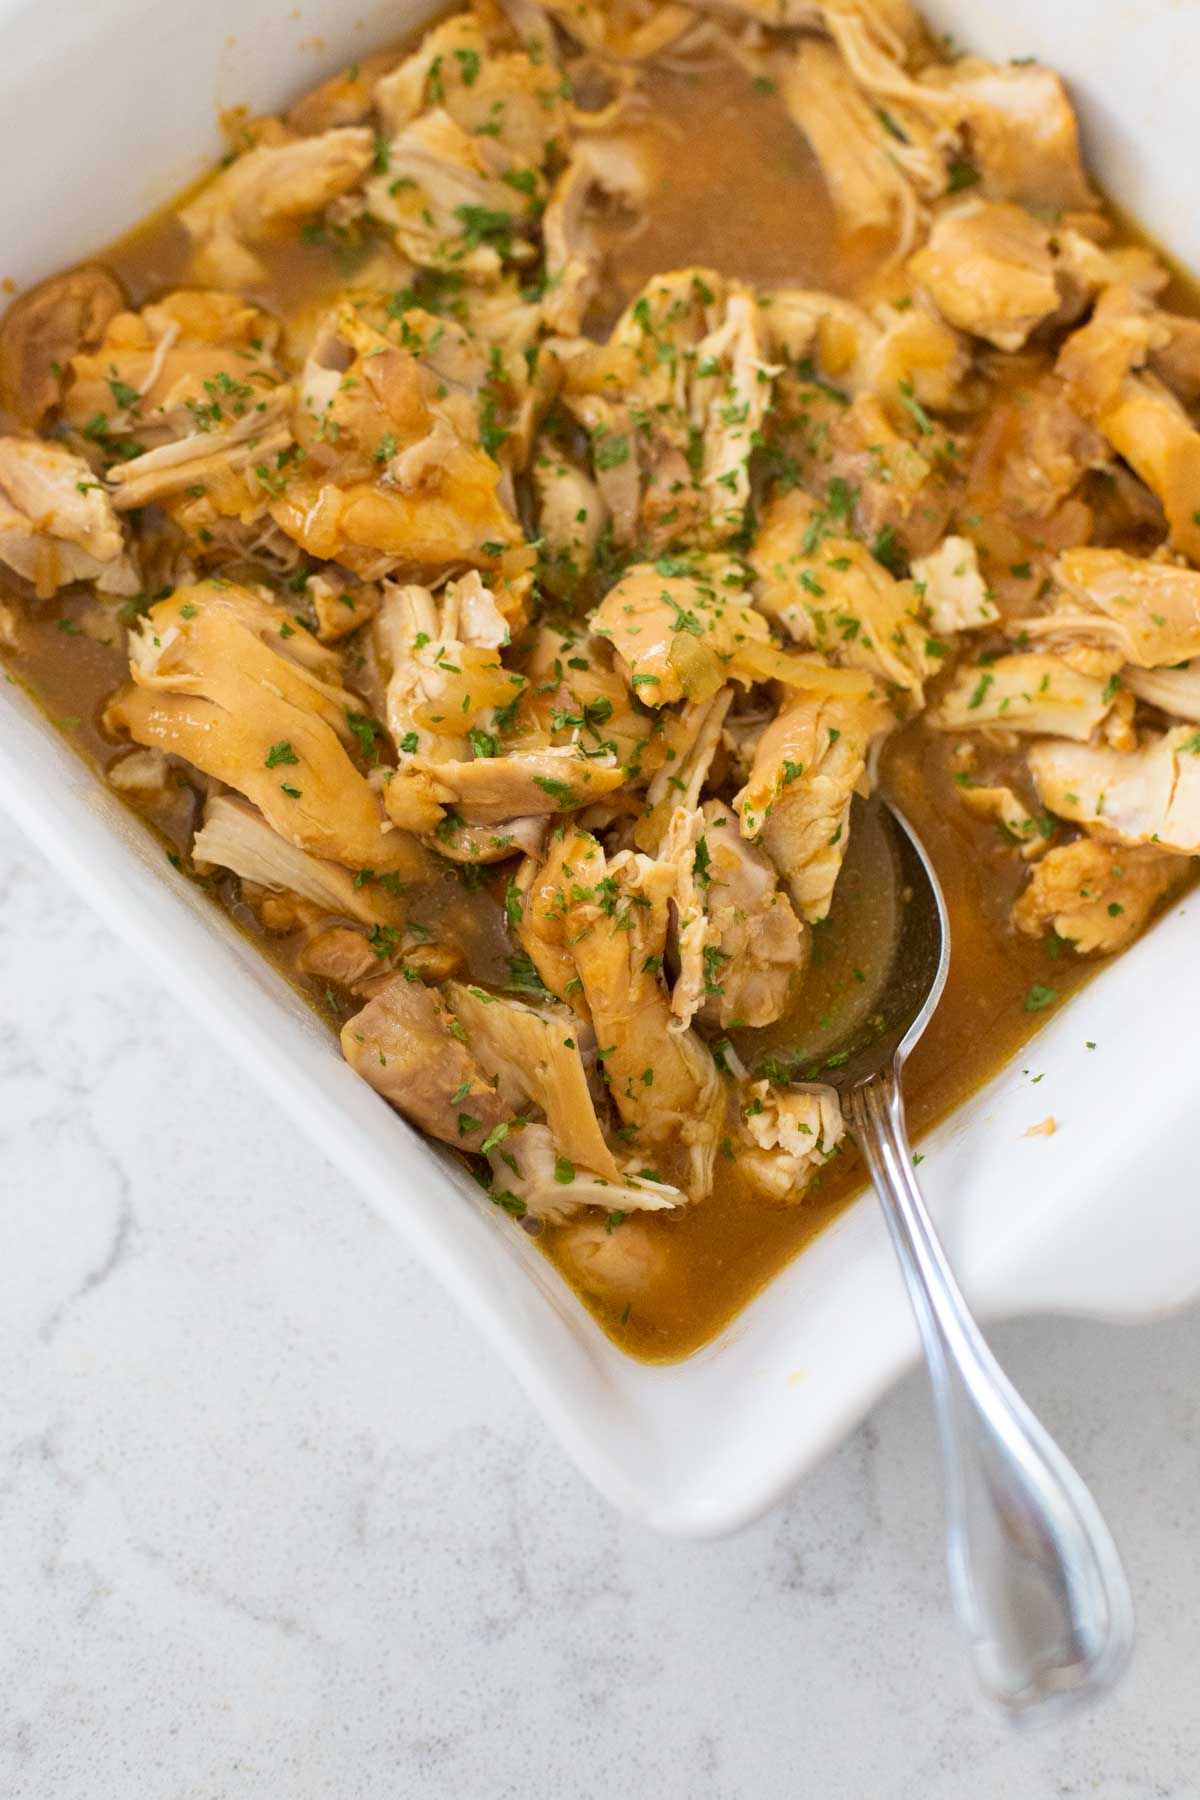 The baking dish of chicken has been coated with apricot sauce and sprinkled with fresh herbs.